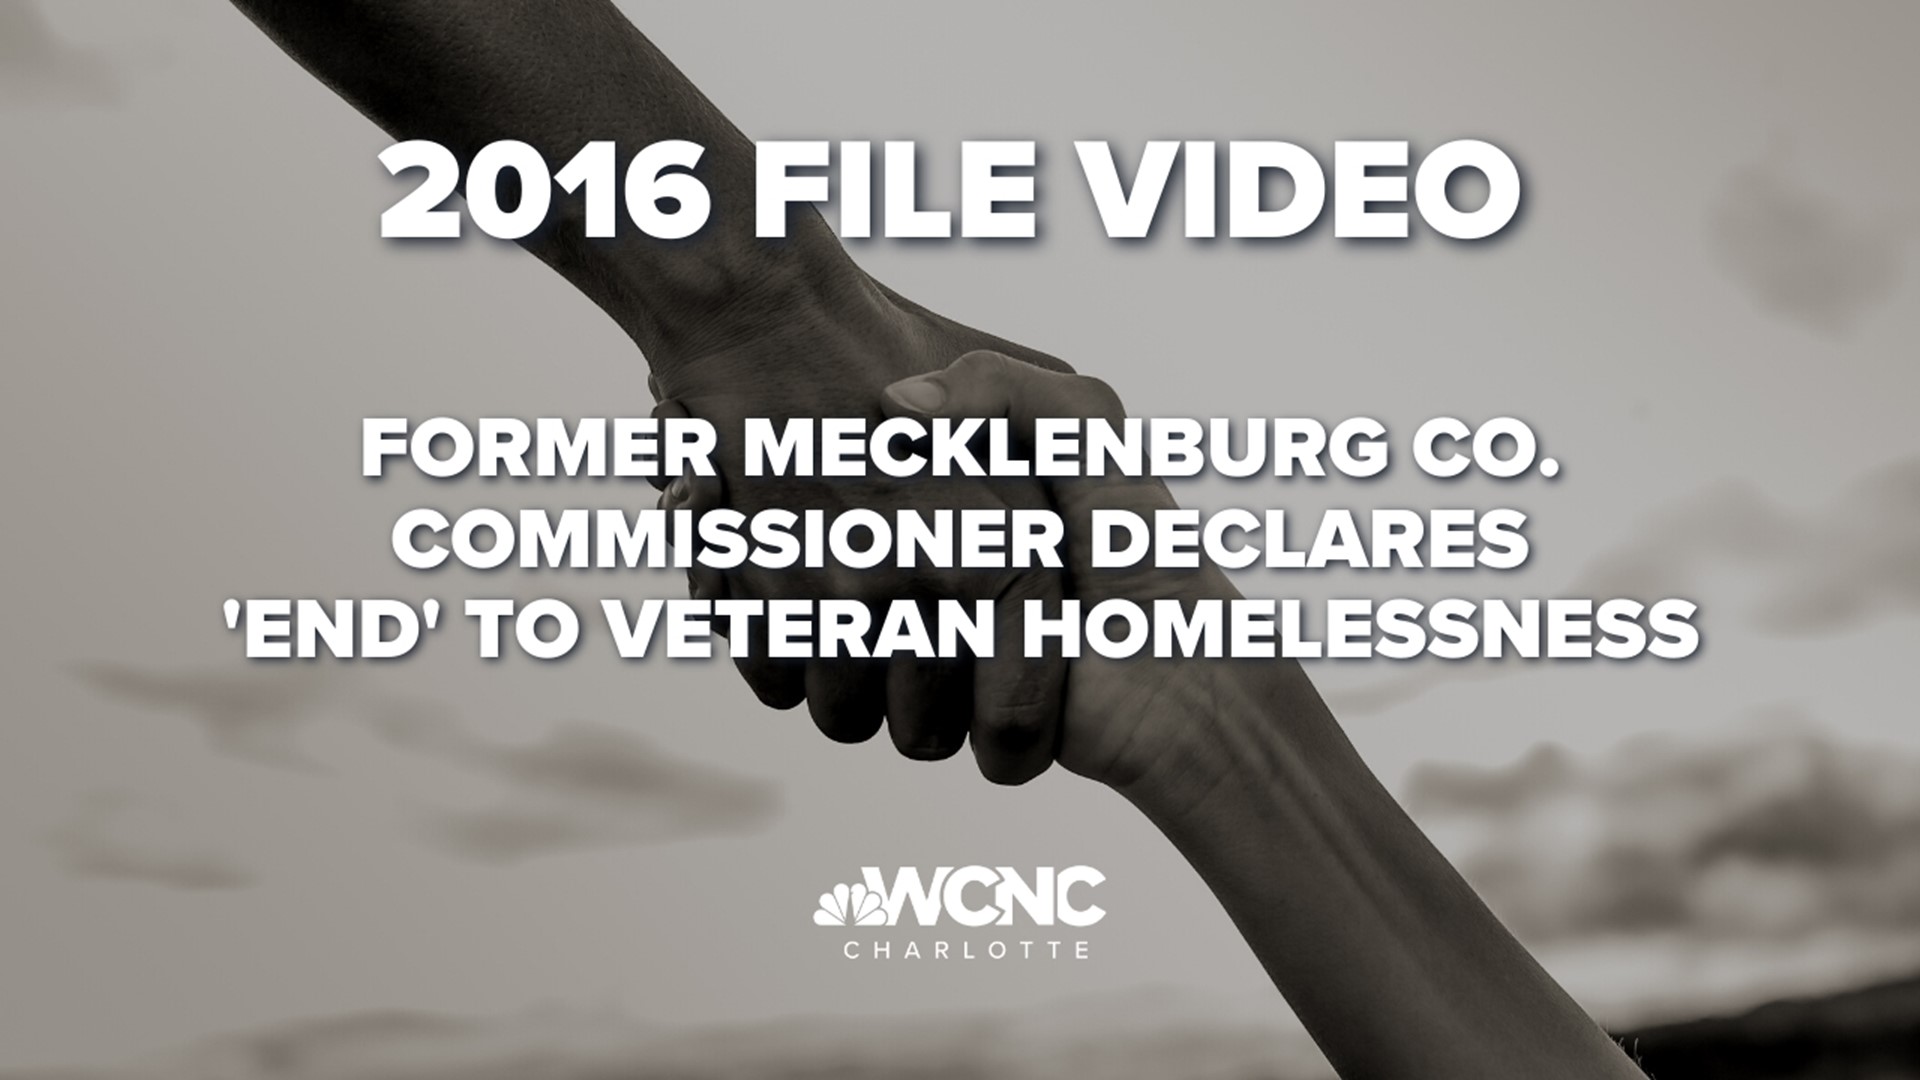 Former county commissioner Trevor Fuller garnered applause during his 2016 State of the County address. But what is the state of veteran homelessness now?